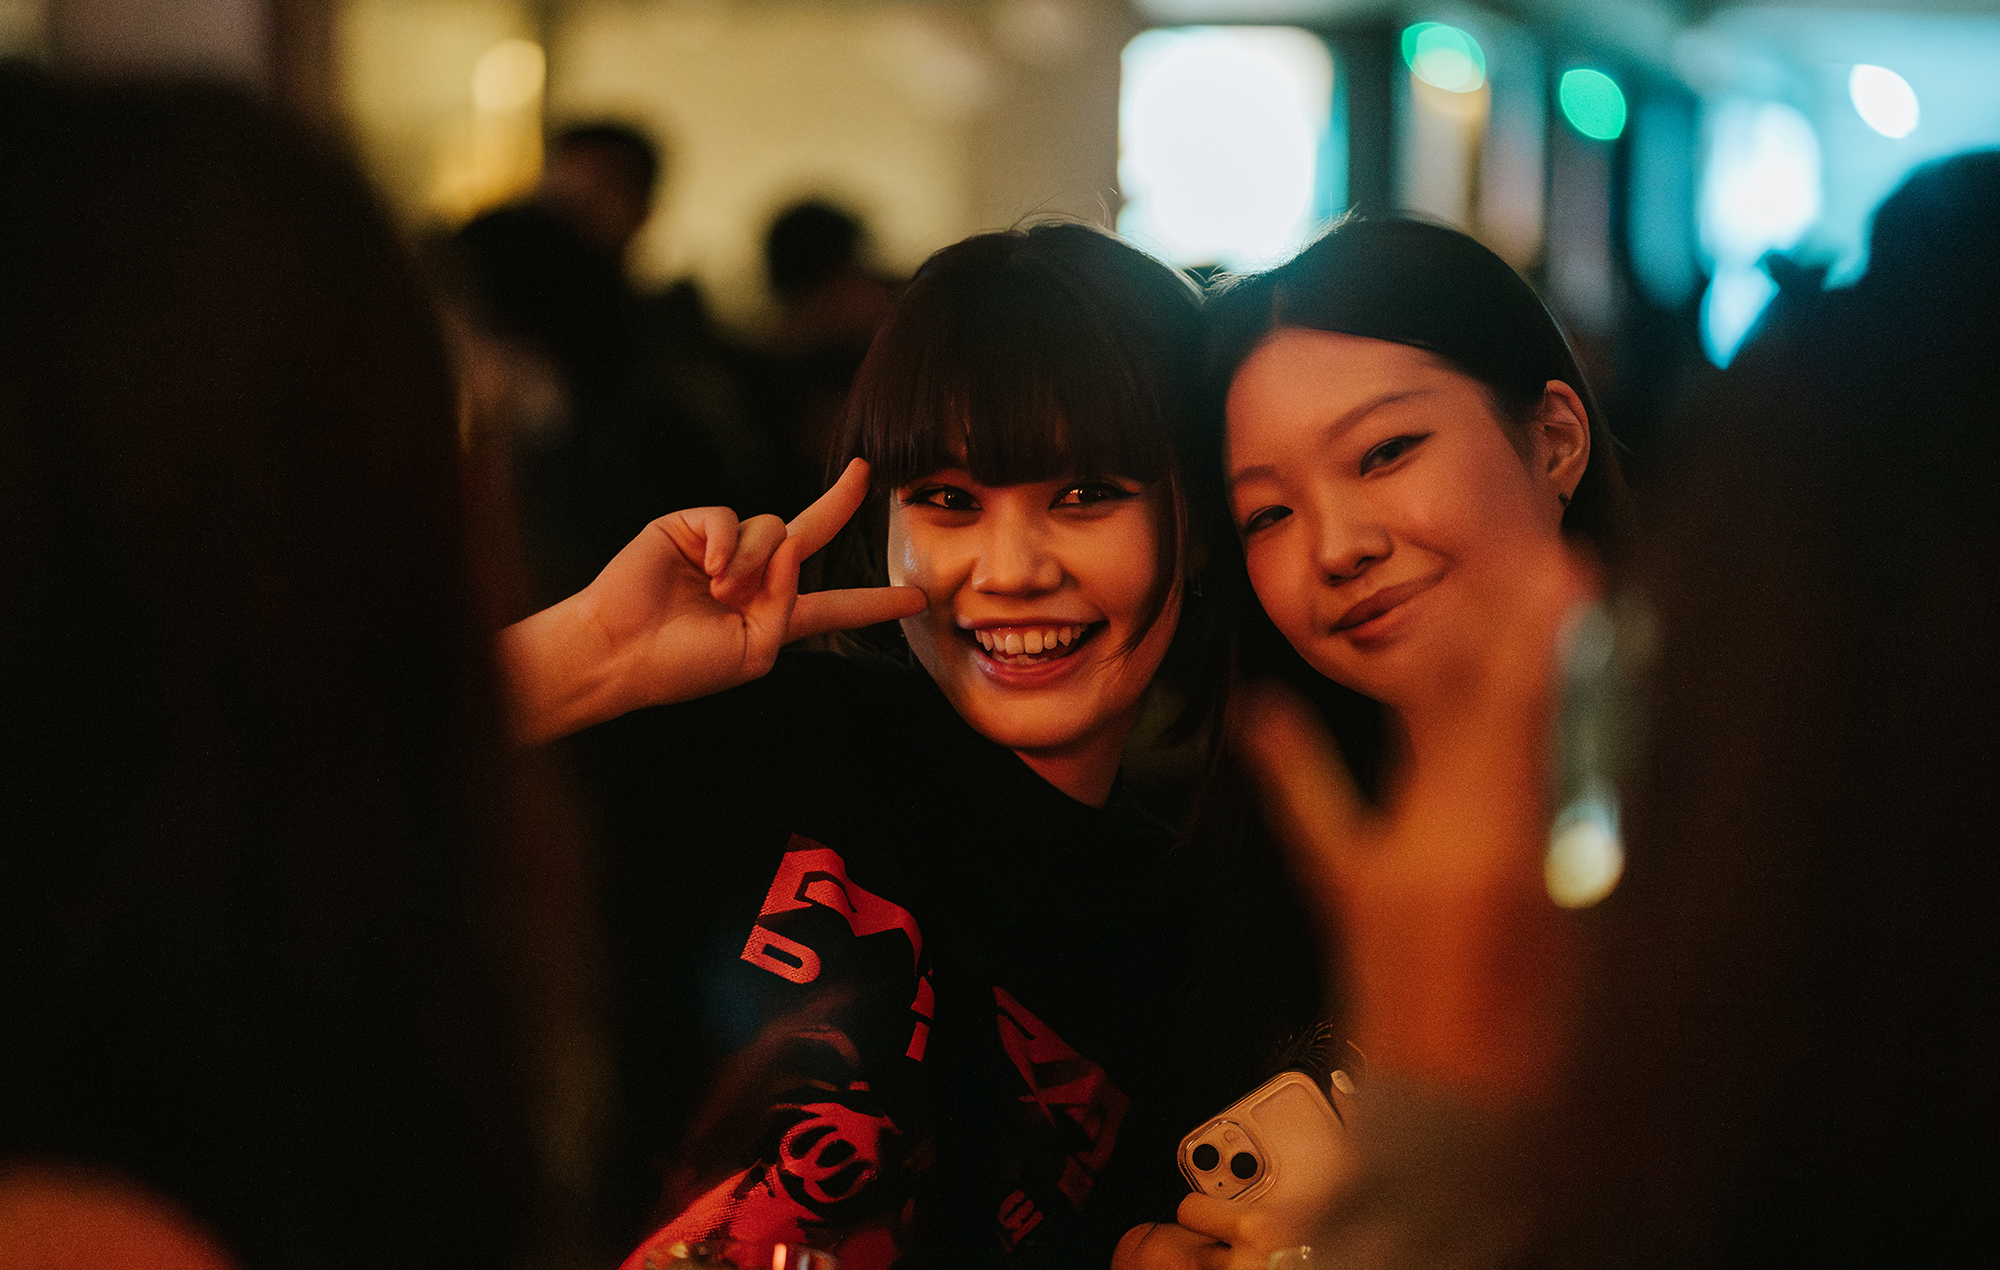 Shye at The Cover Party: Singapore Edition, photo by Axel Serik